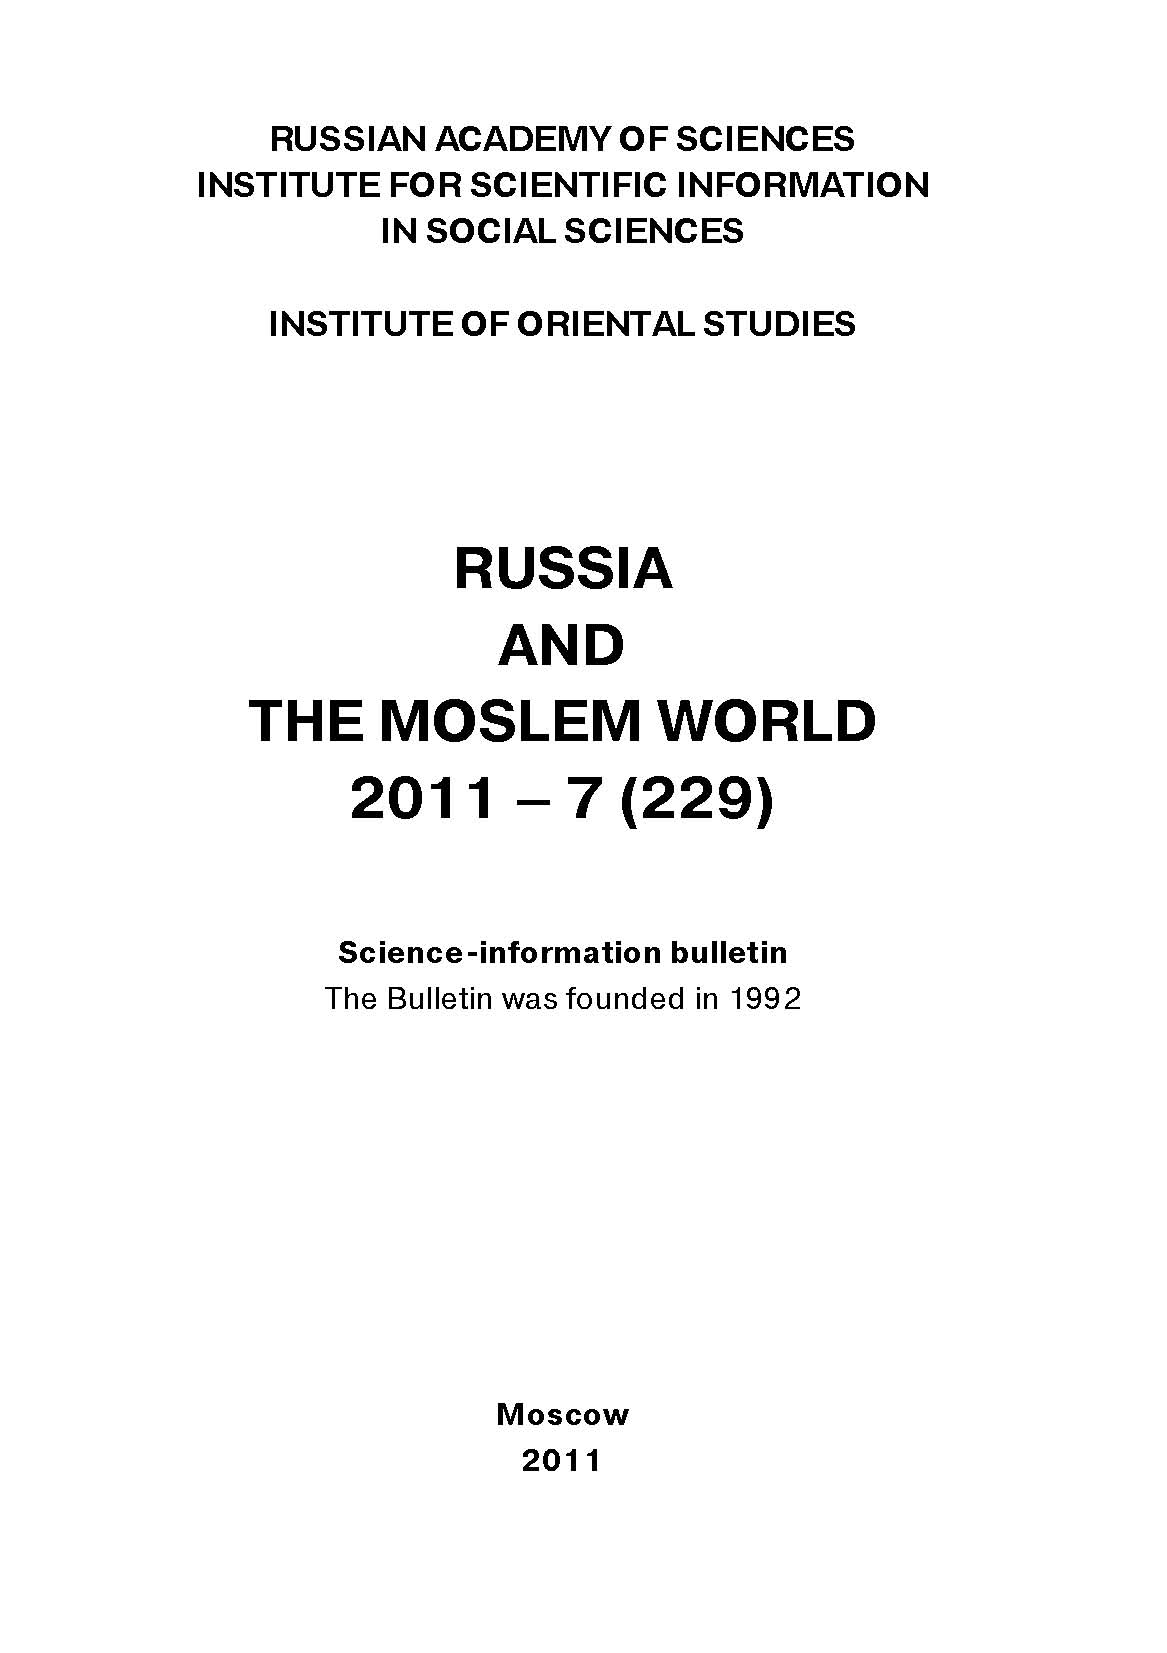 Russia and the Moslem World№ 07 / 2011